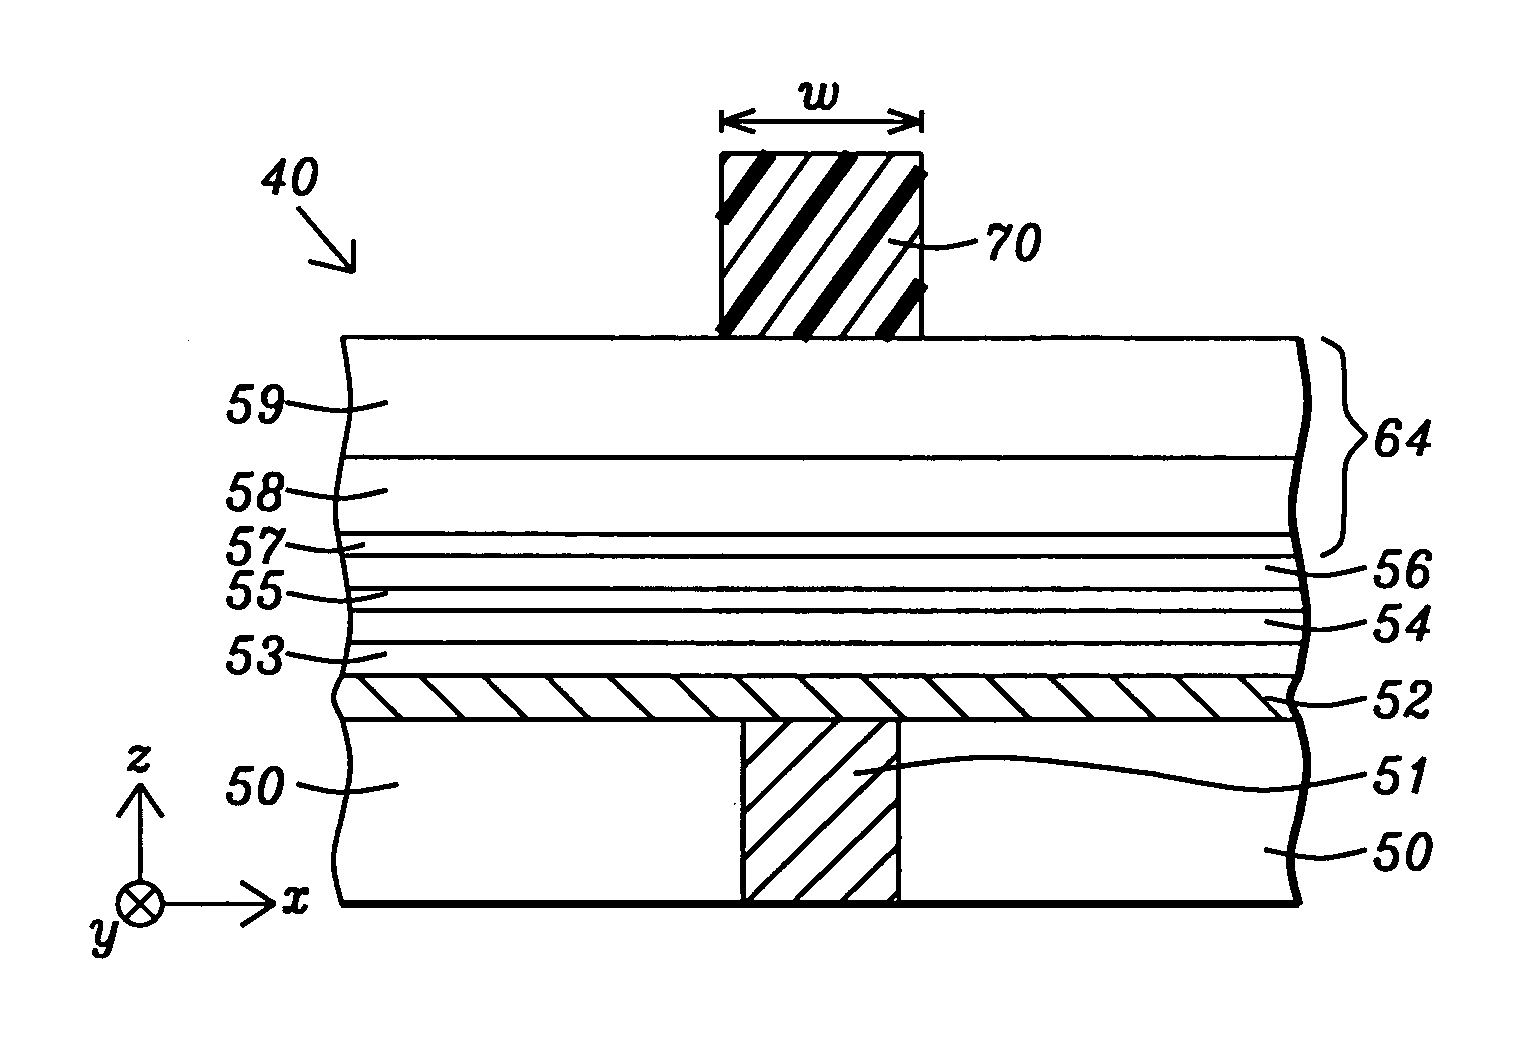 Composite hard mask with upper sacrificial dielectric layer for the patterning and etching of nanometer size MRAM devices